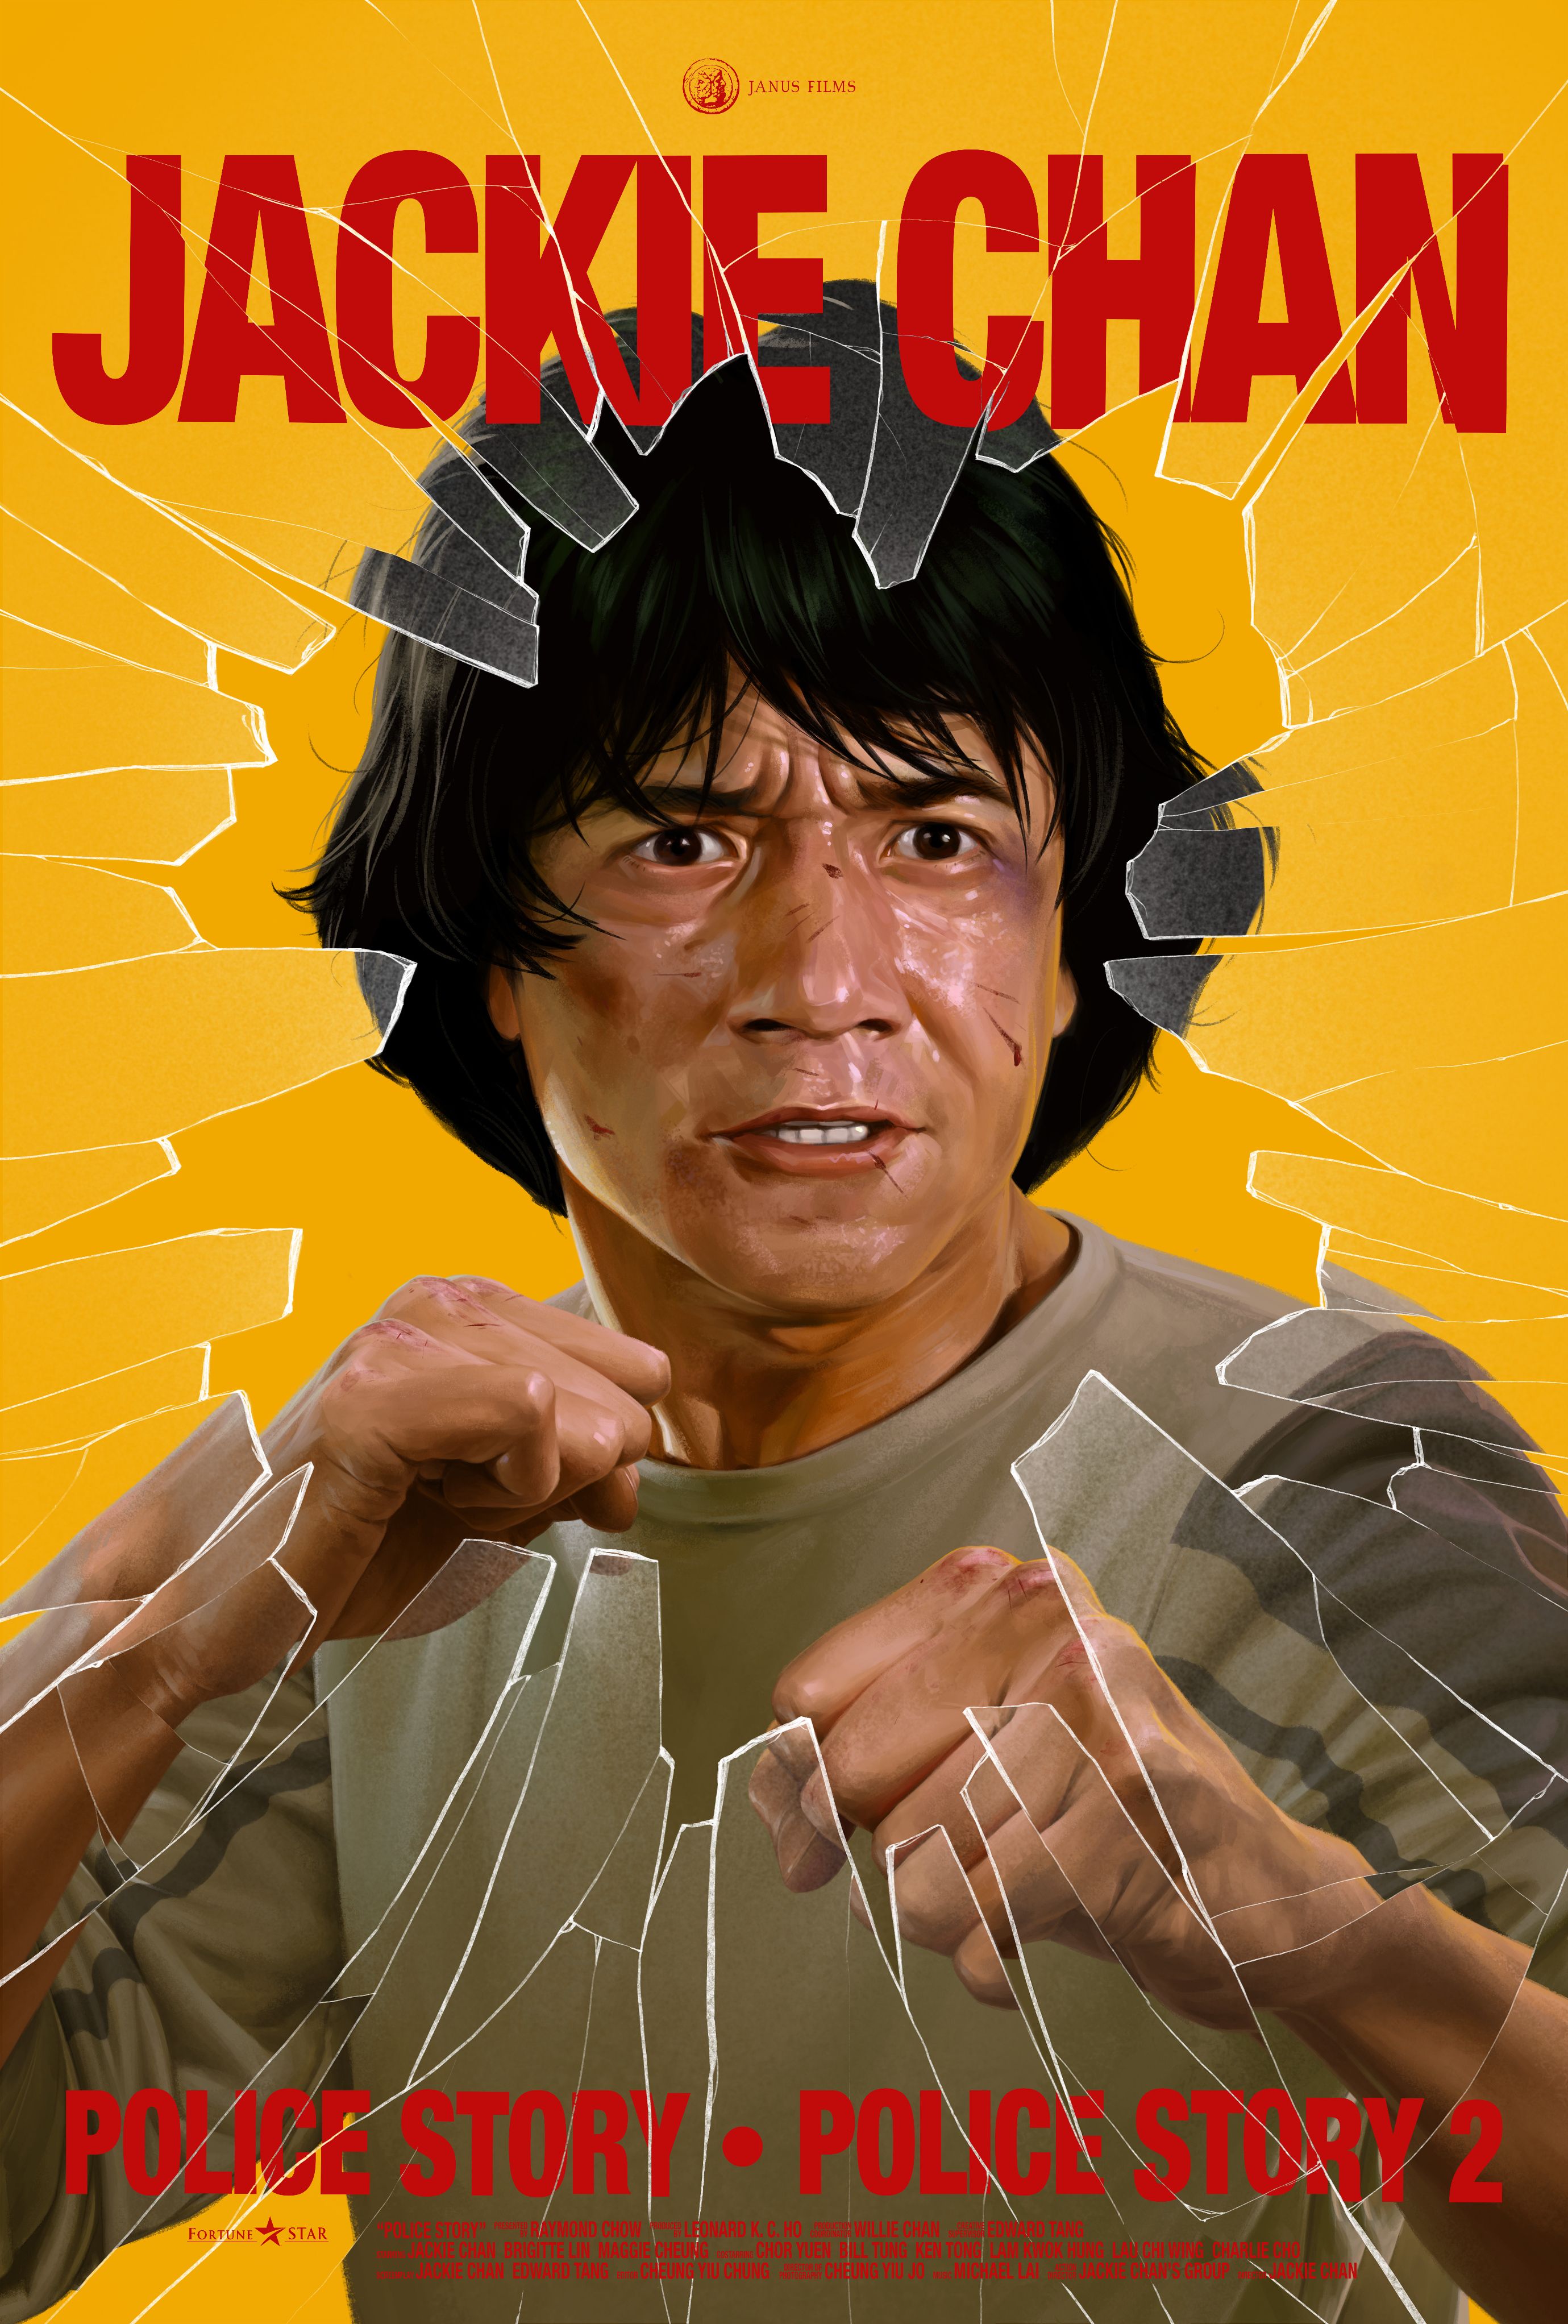 Police Story 1 & 2 double feature 4K poster